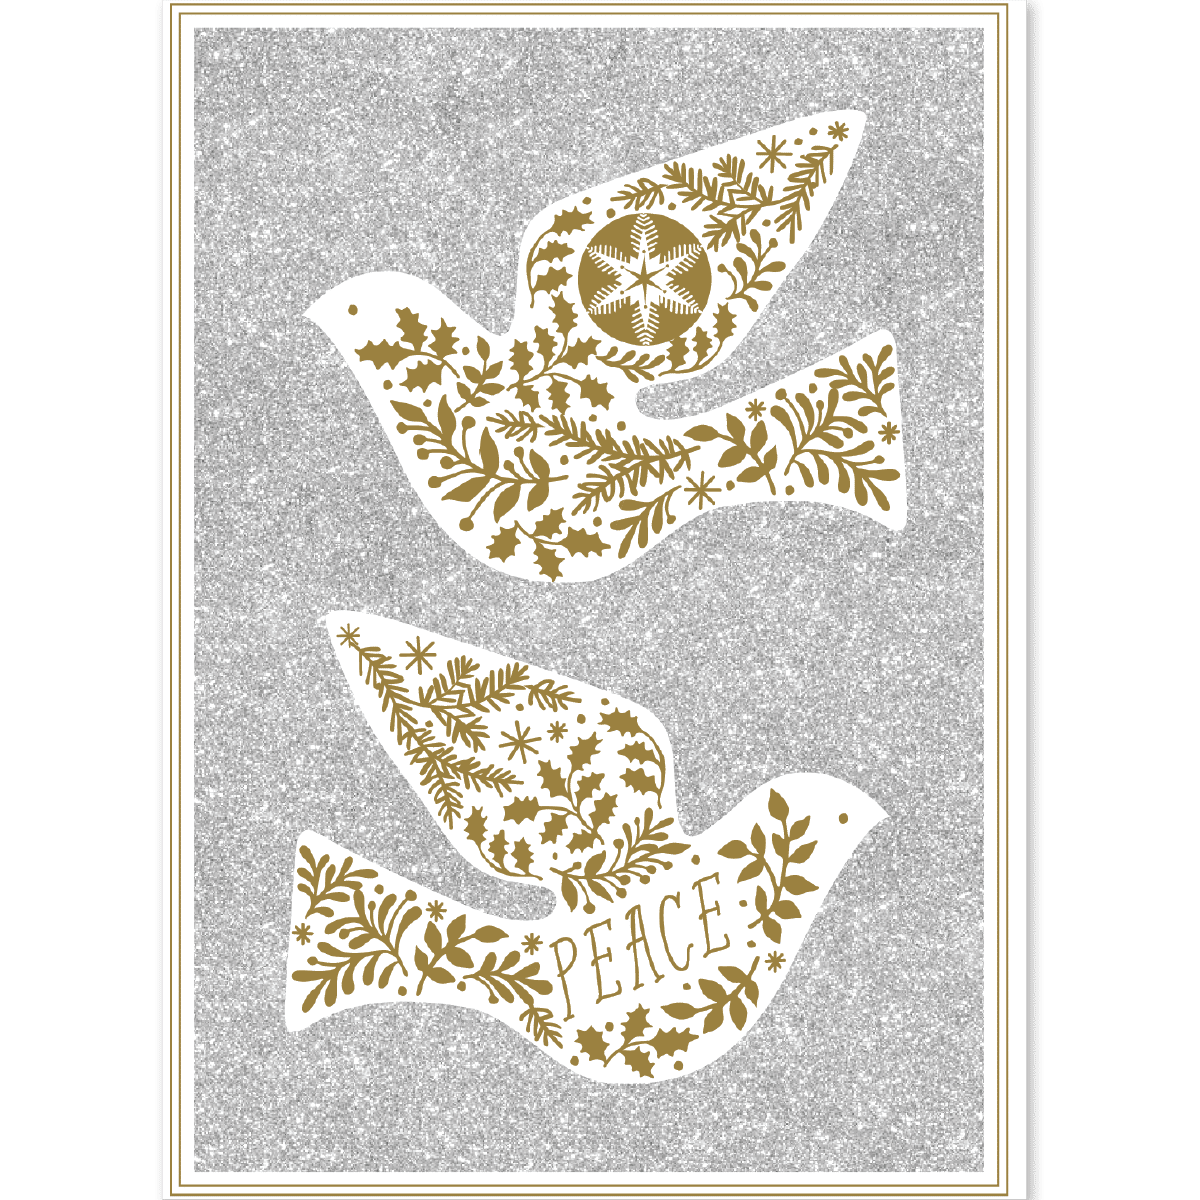 a pair of doves with the words peace on them.